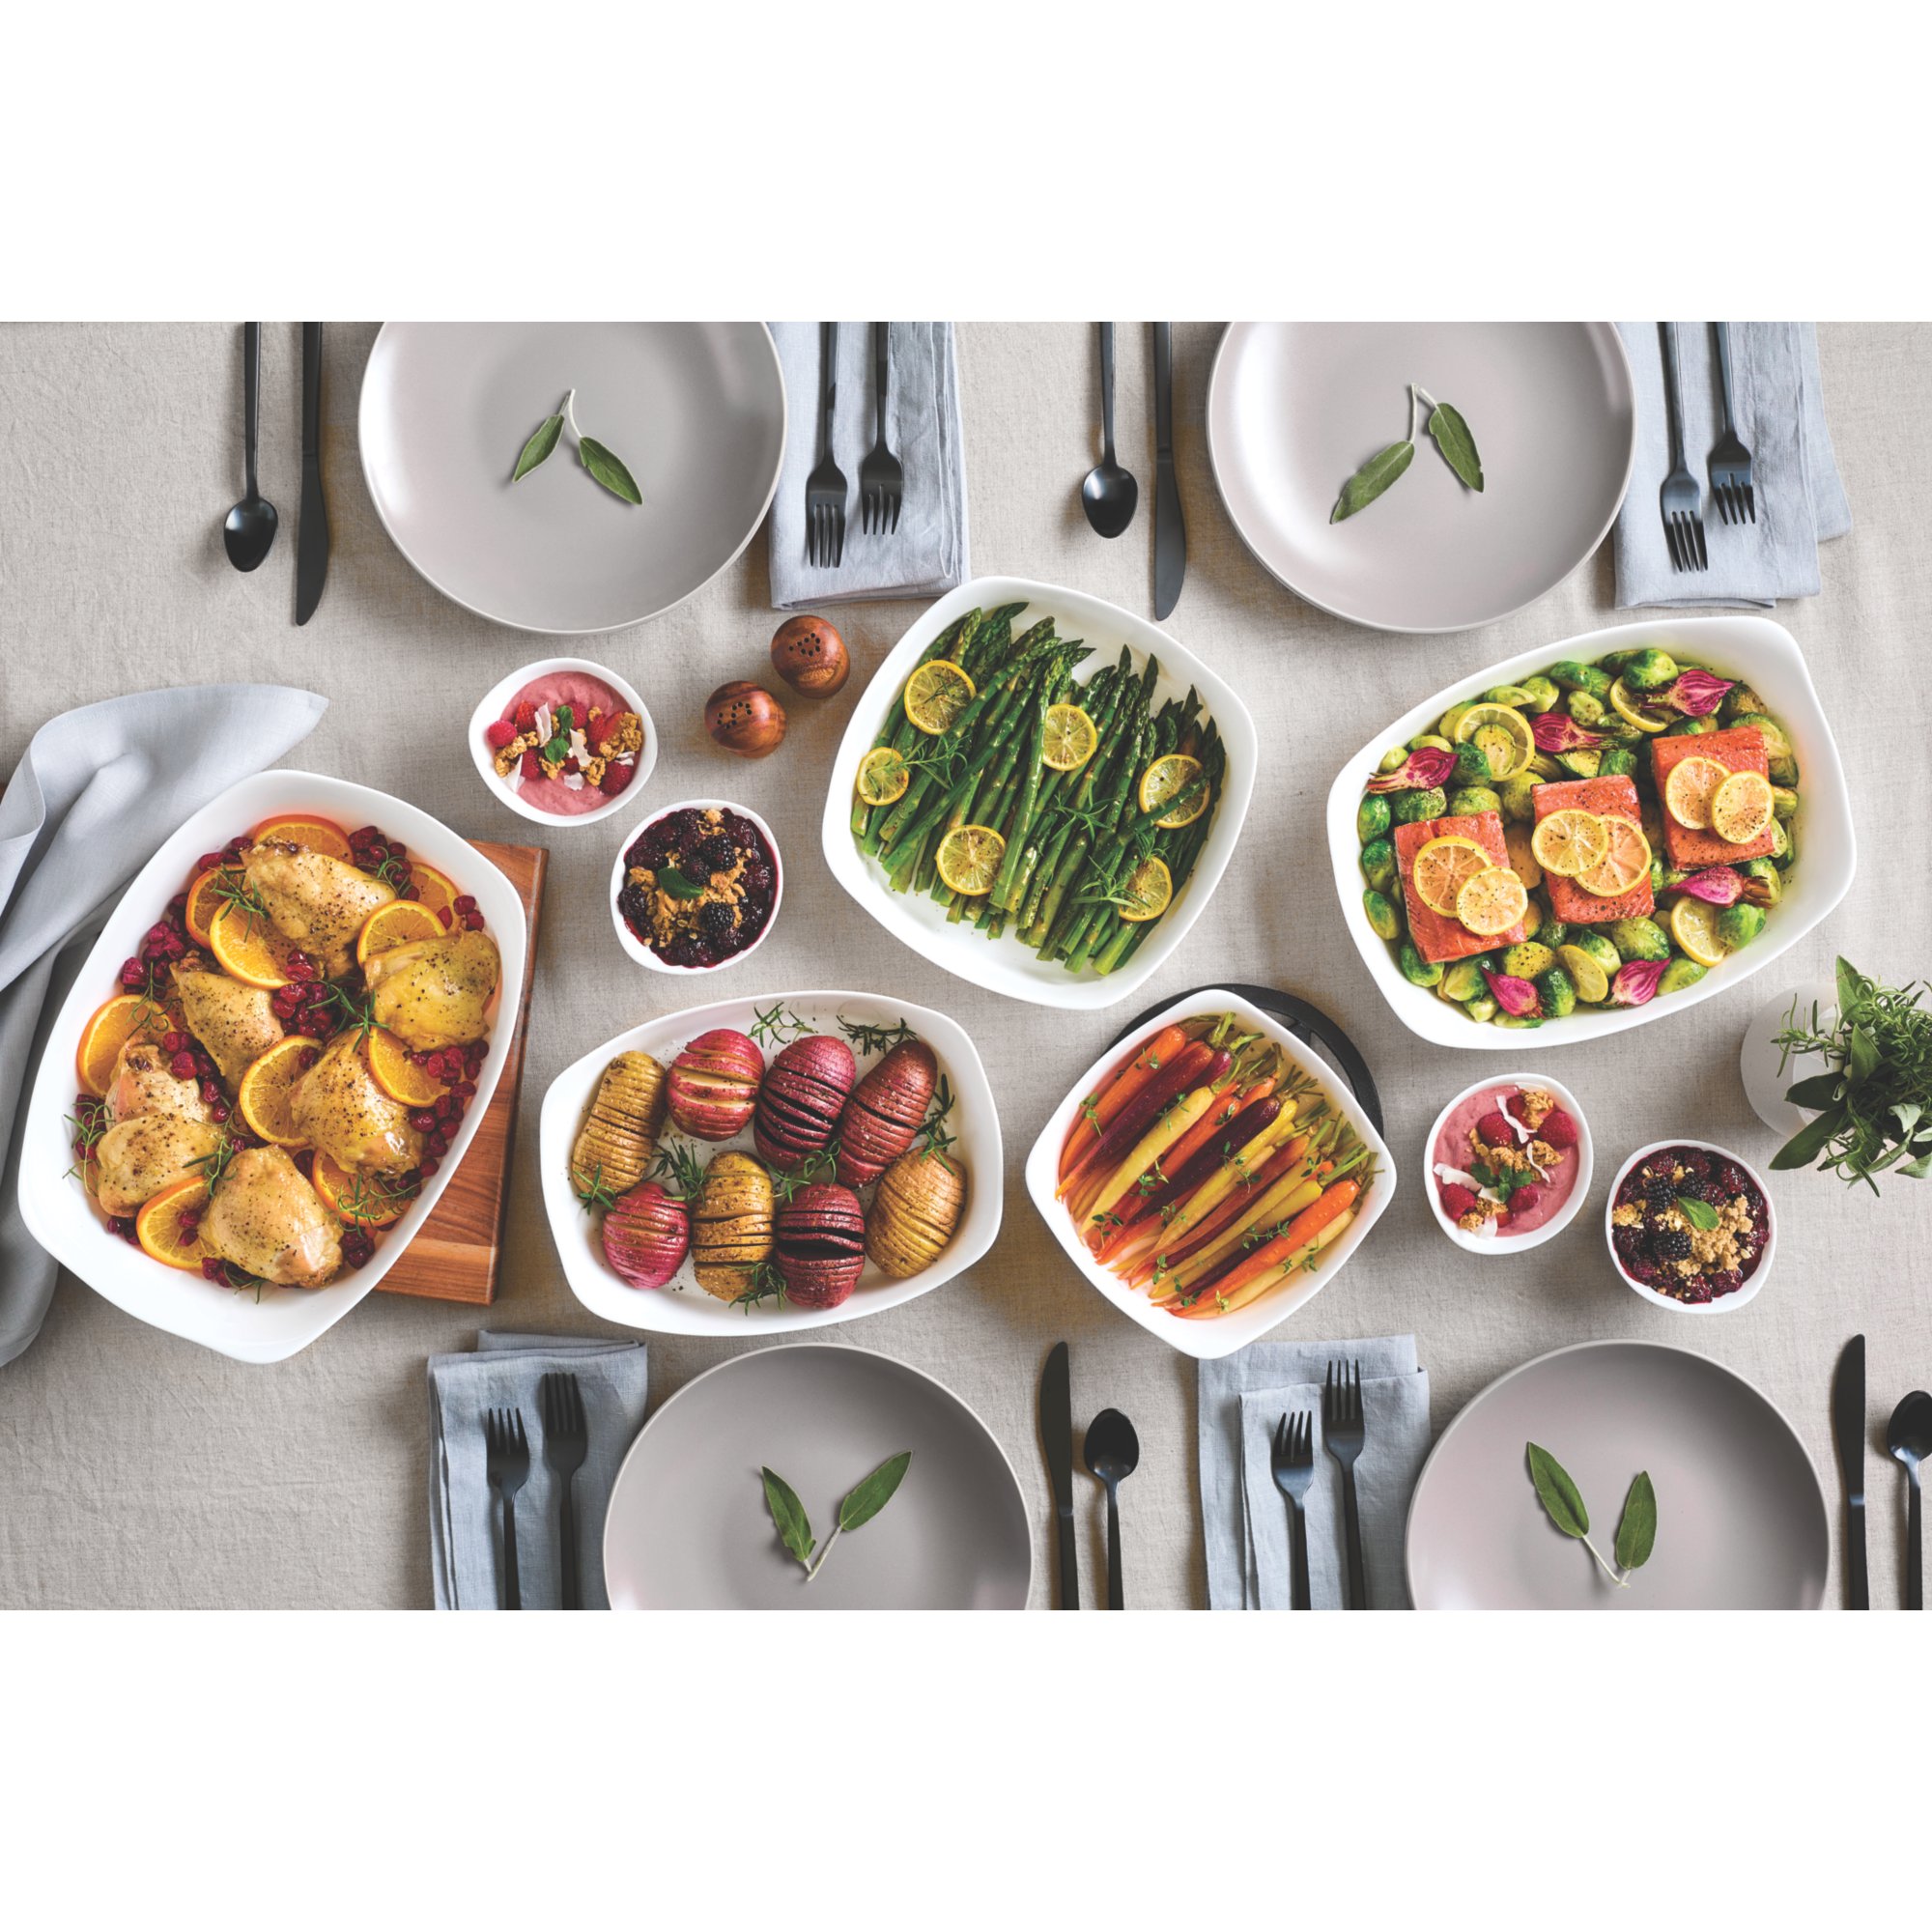 Rubbermaid DuraLite Glass Bakeware, 12-Piece Set, Baking Dishes, Casserole  Dishes, and Ramekins & Reviews